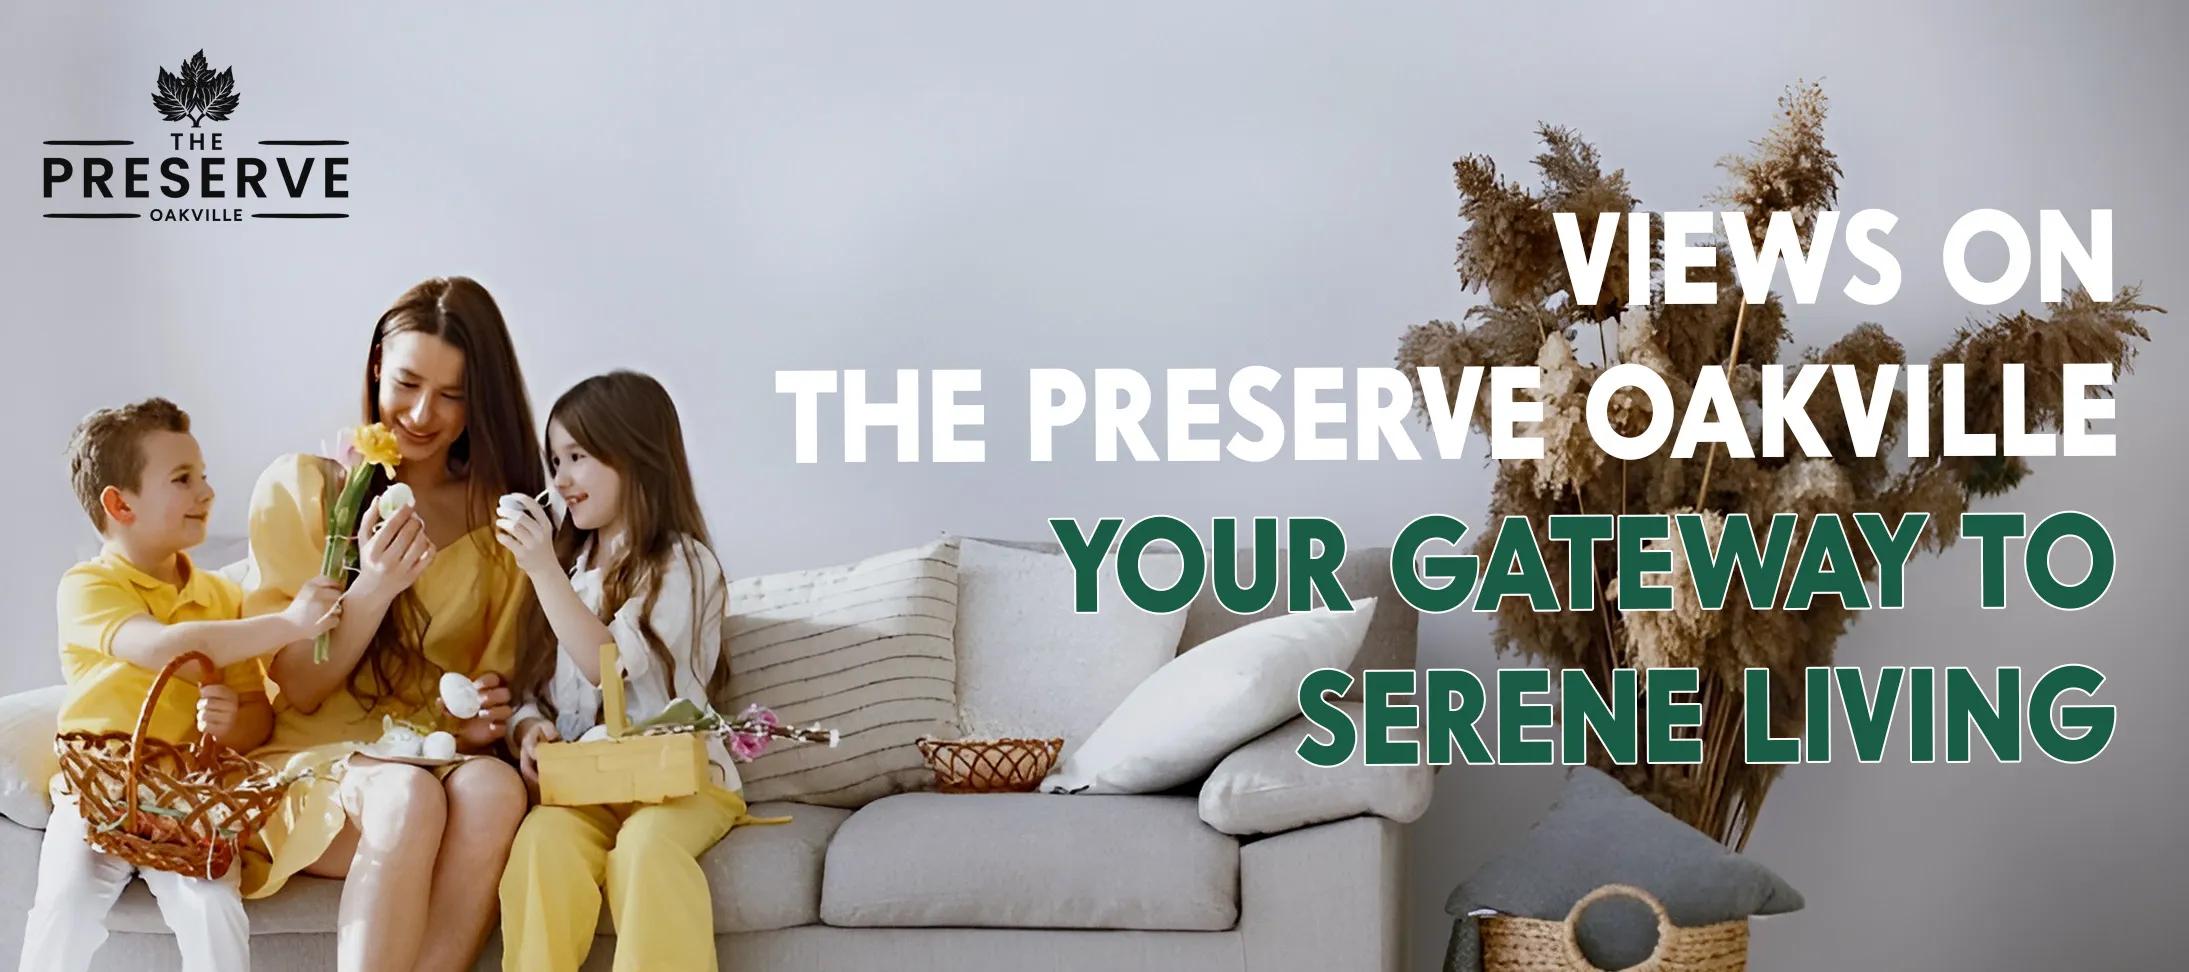 The Preserve Oakville - Your Gateway to Serene Living - Best Homes For Sale